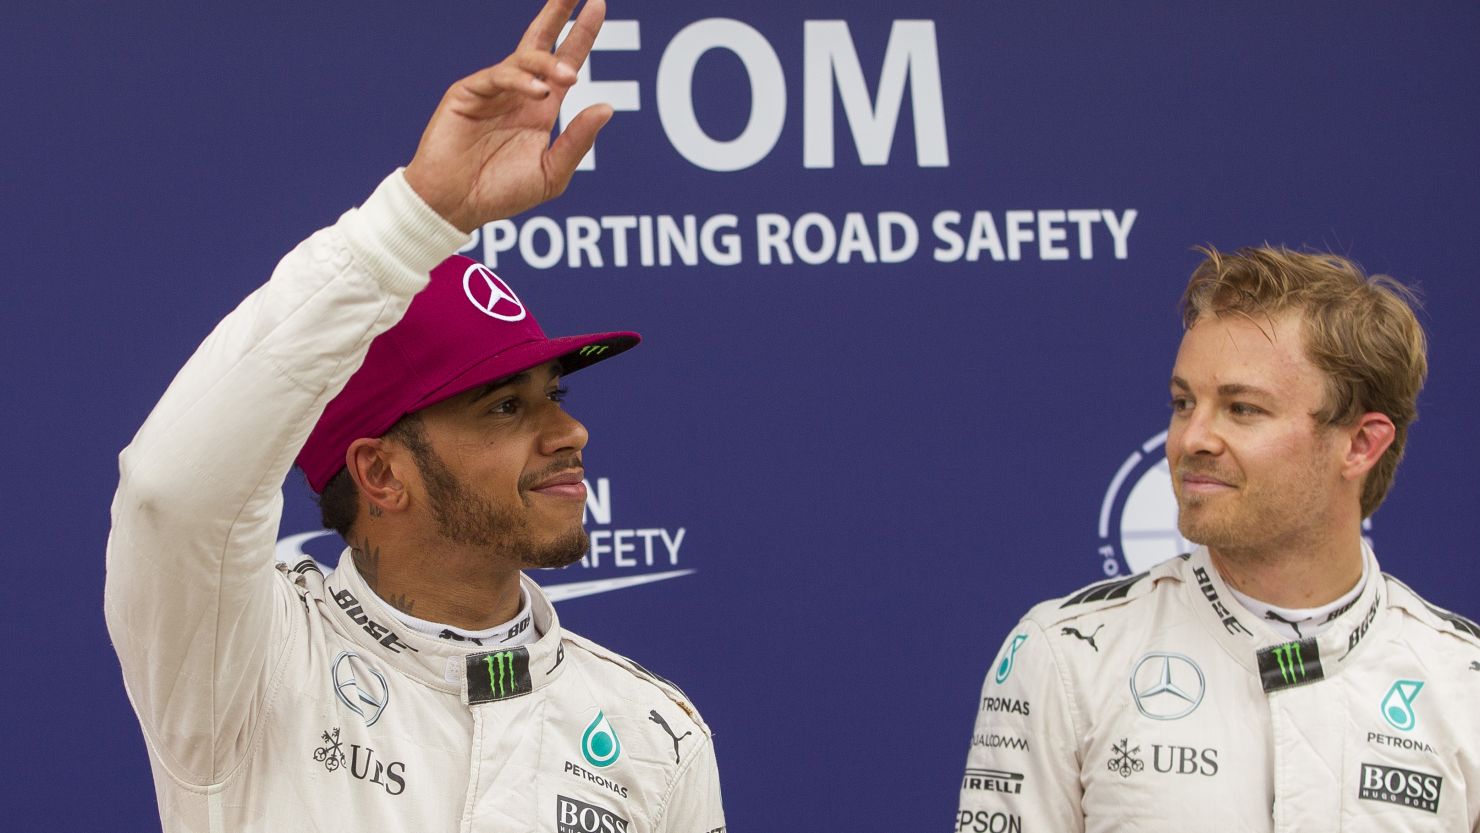 Lewis Hamilton pipped his Mercedes teammate Nico Rosberg to pole position in Canada.